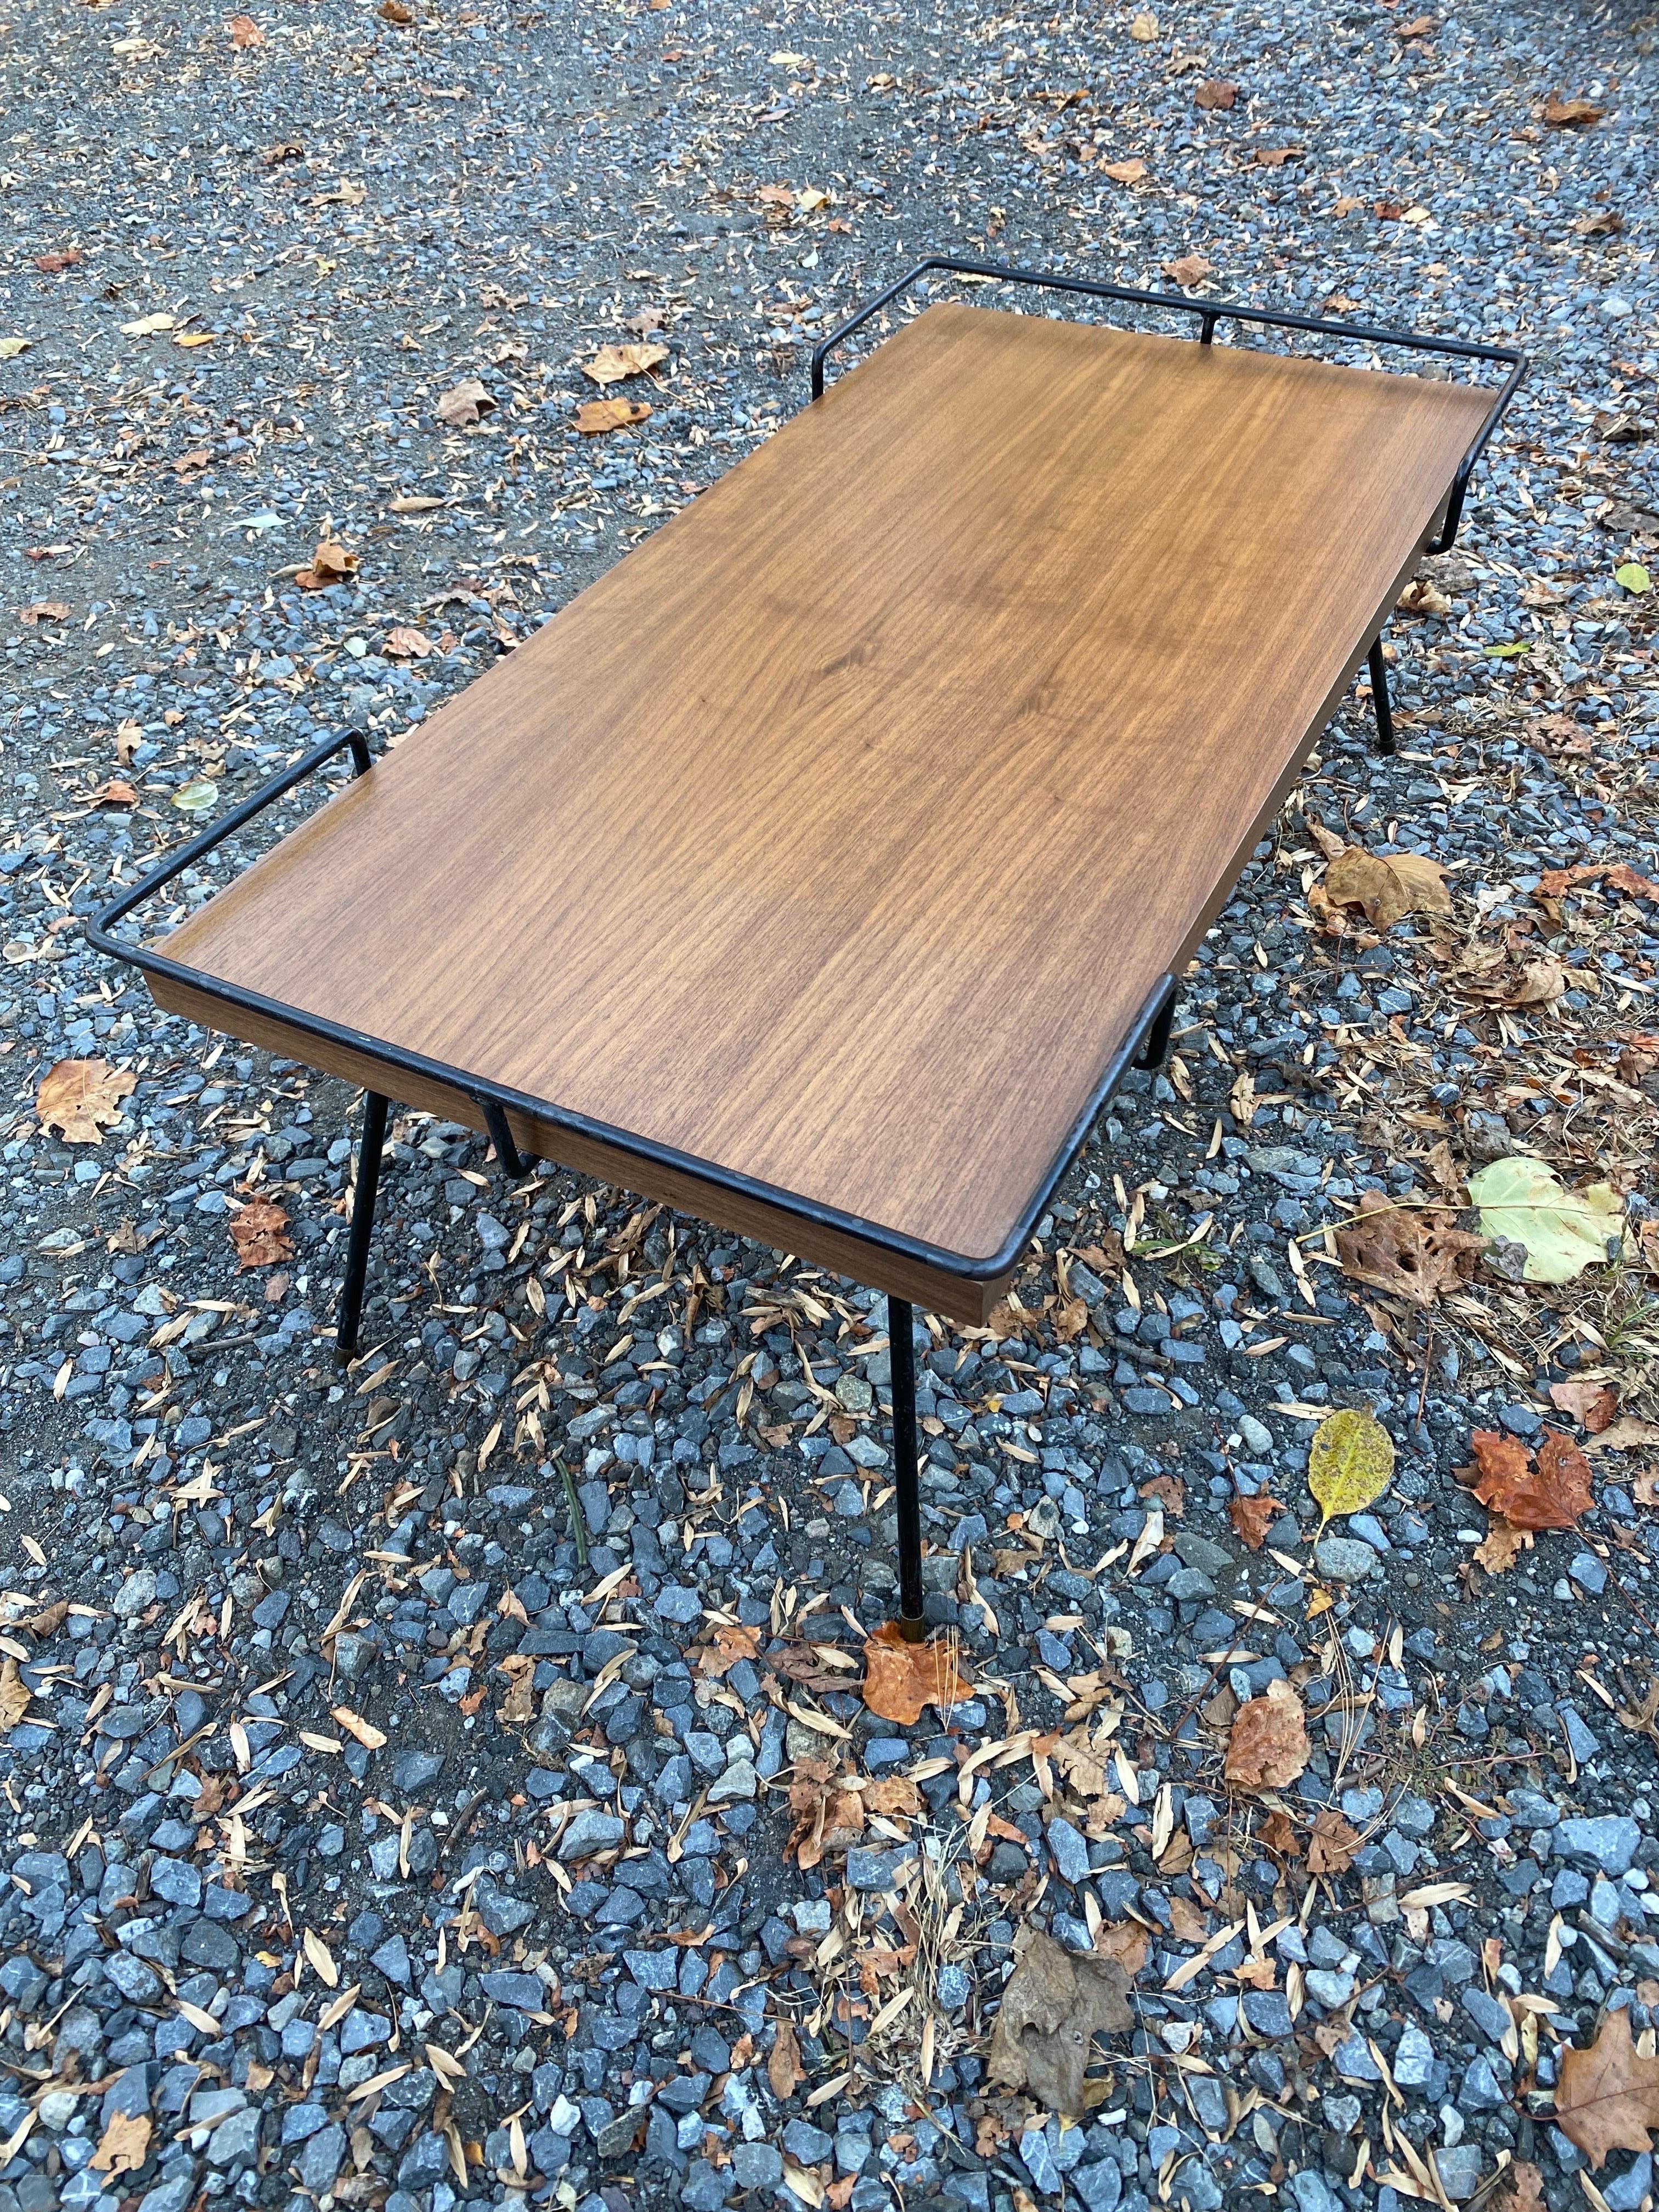 Tony Paul Style Coffee Table.  Iron Frame with new Walnut Top.  Iron wraps around Coffee table that works to keep things from rolling off and as a design element!  Matching pair of End Tables available separately!